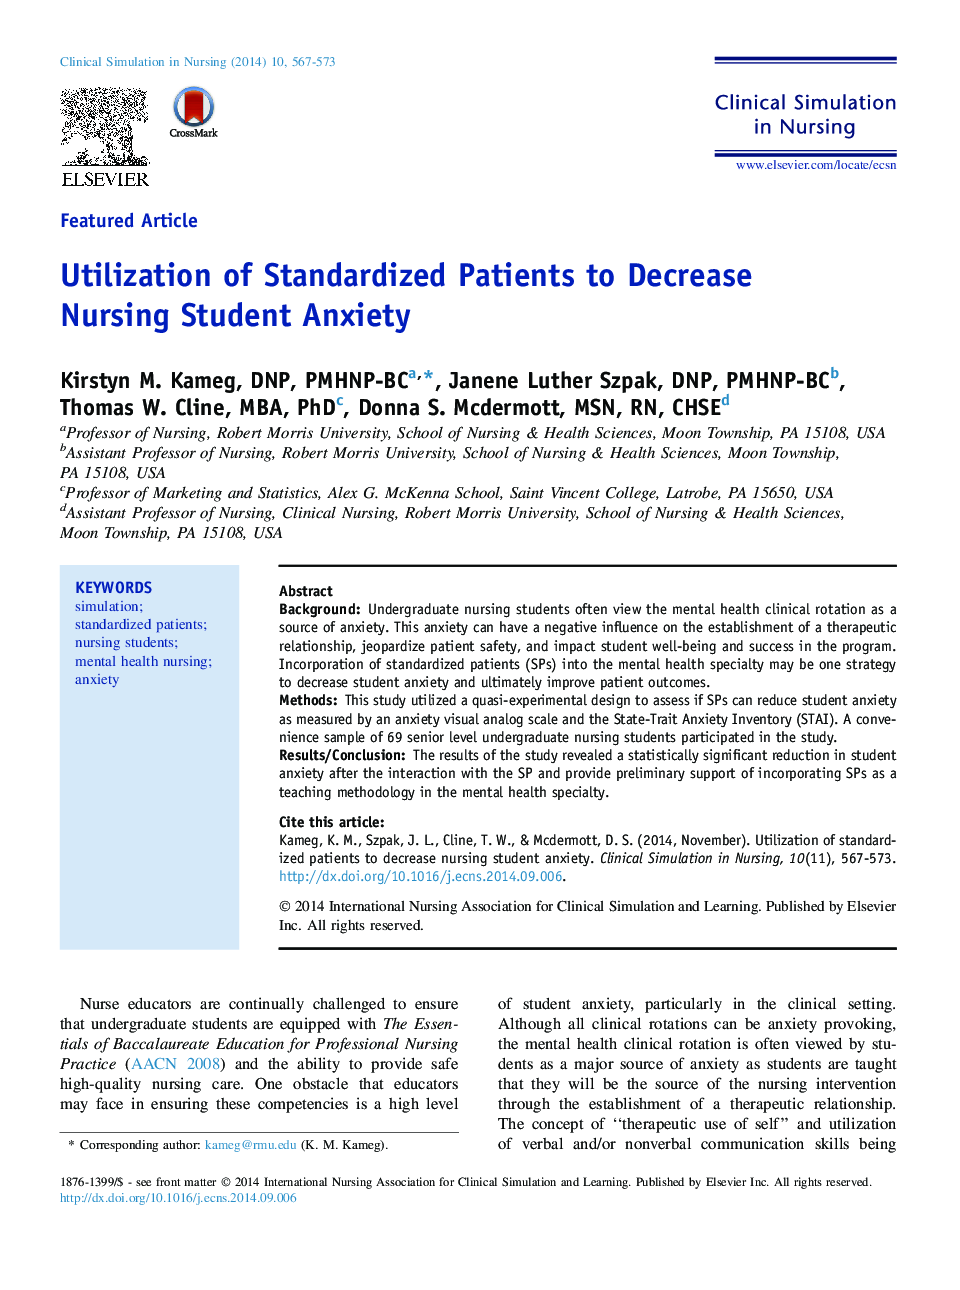 Utilization of Standardized Patients to Decrease Nursing Student Anxiety